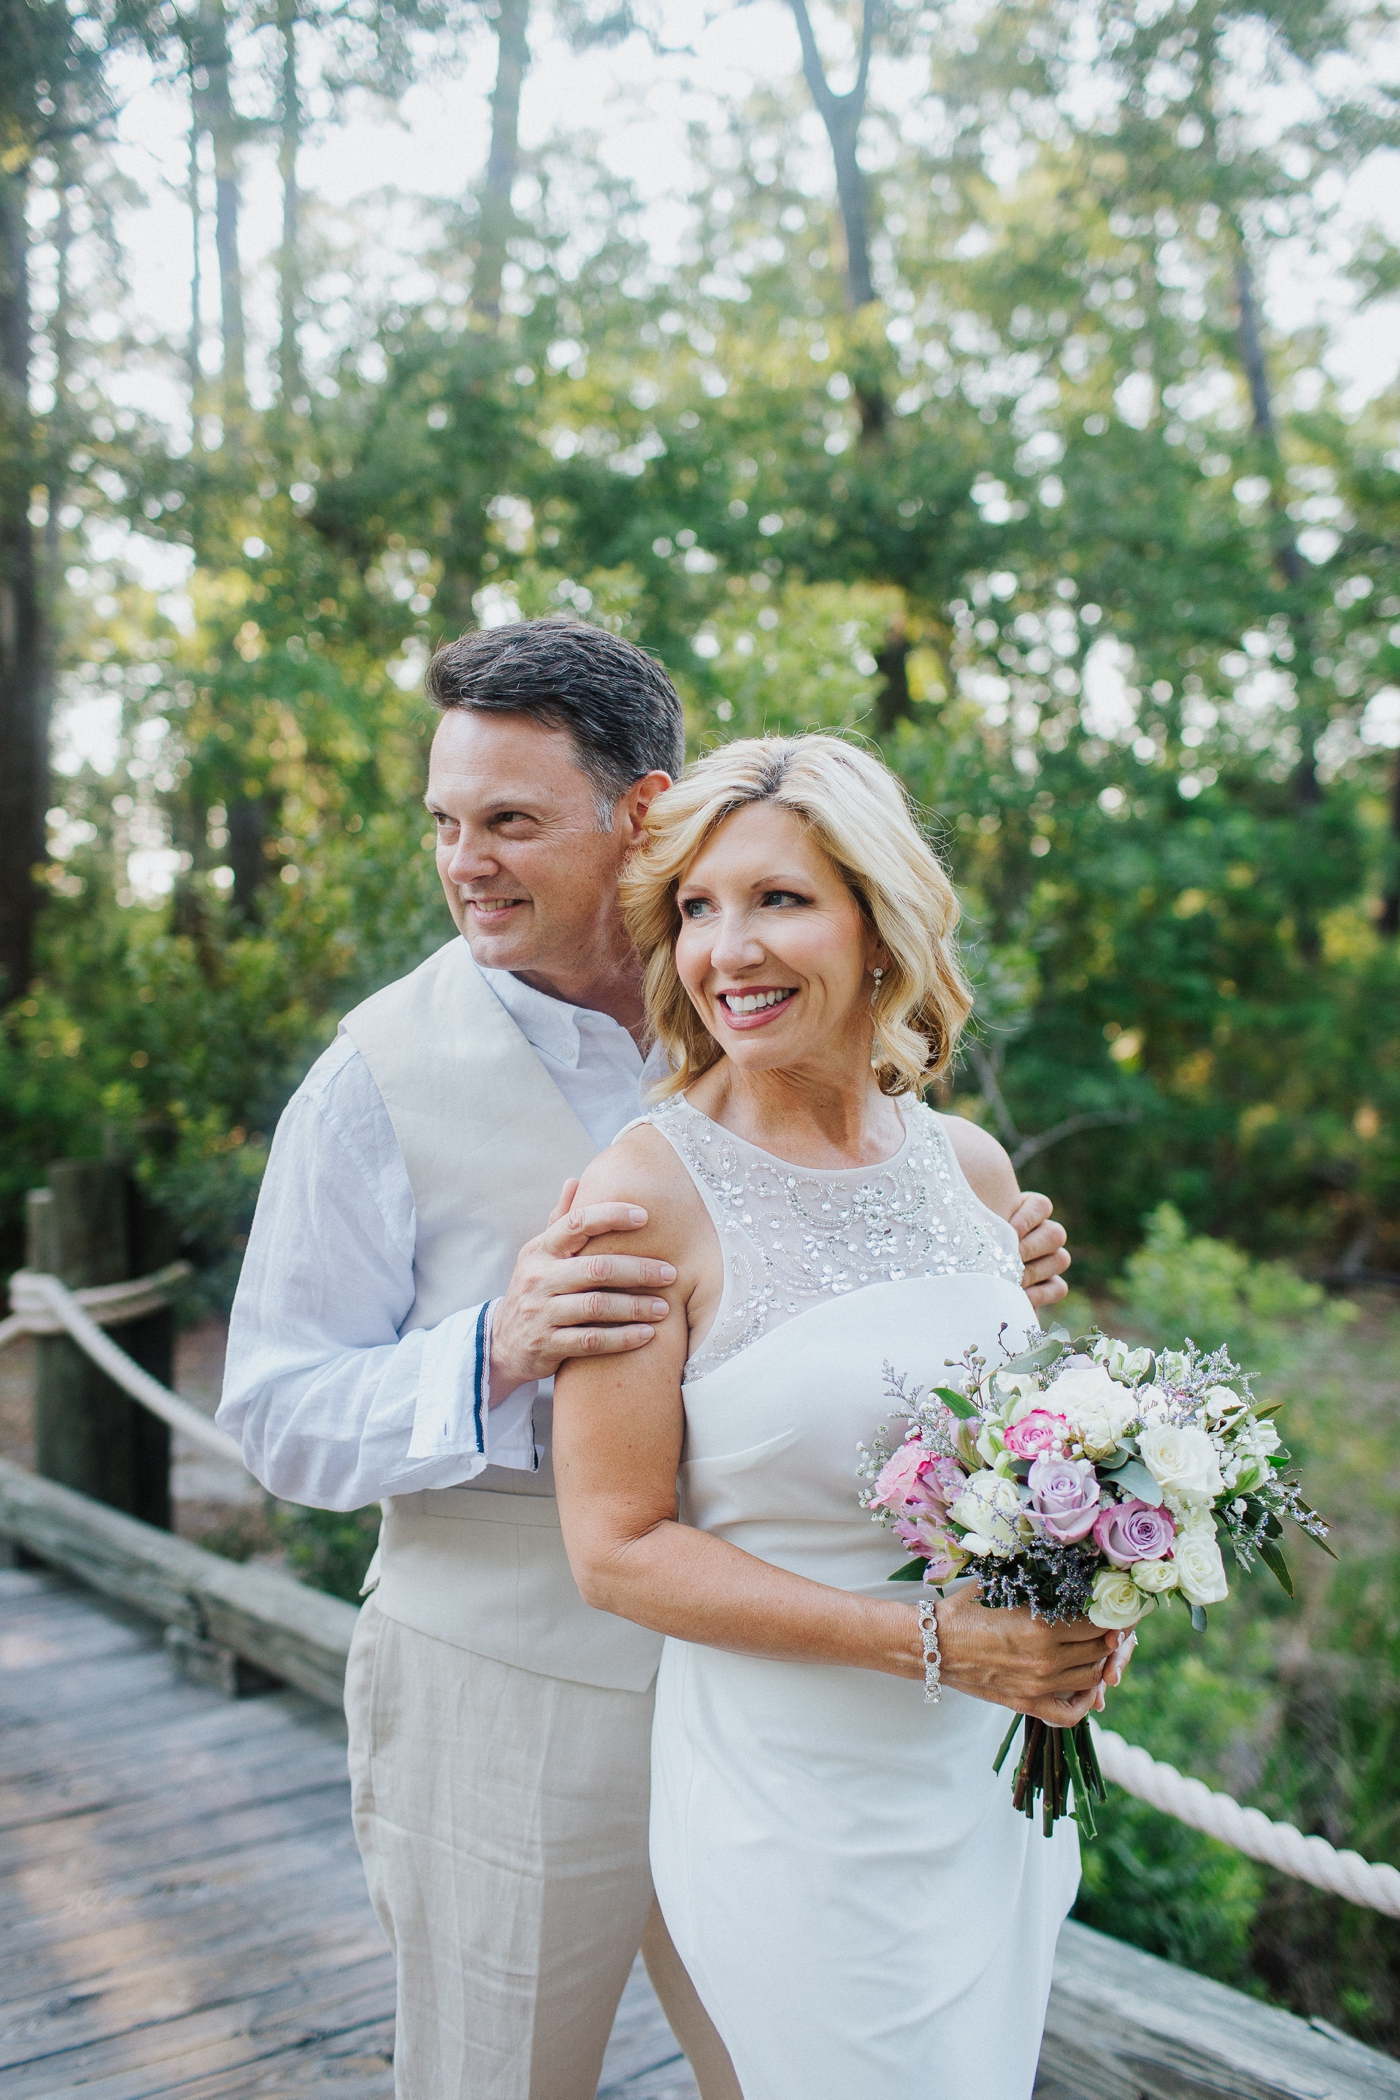 Intimate elopement at The Landings, outside of Historic Savannah | Izzy and Co.